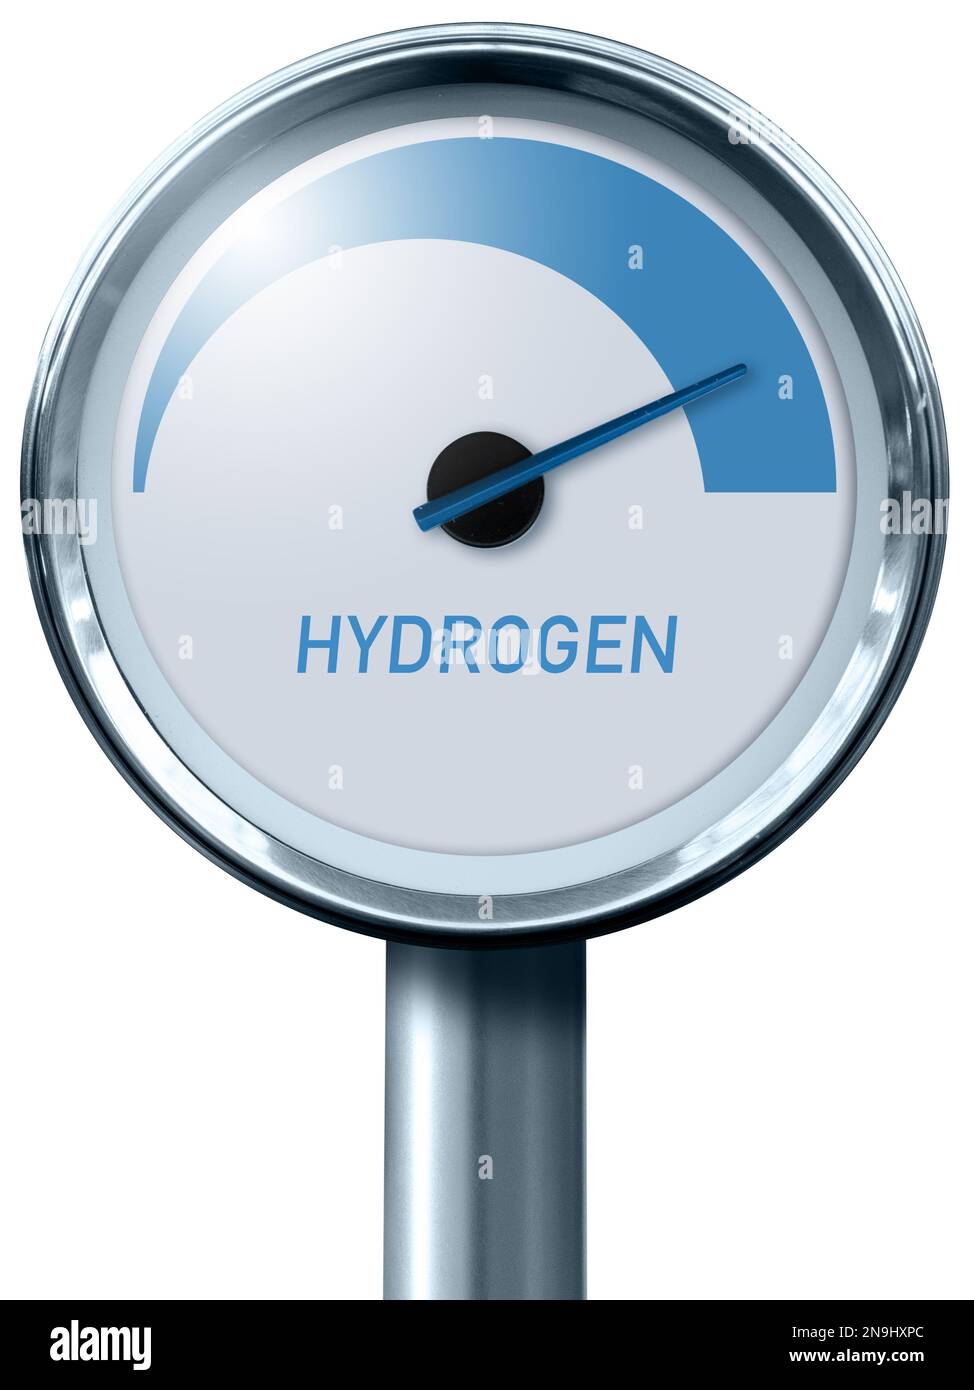 Concept of hydrogen pressure meter on the pipeline. Stock Photo